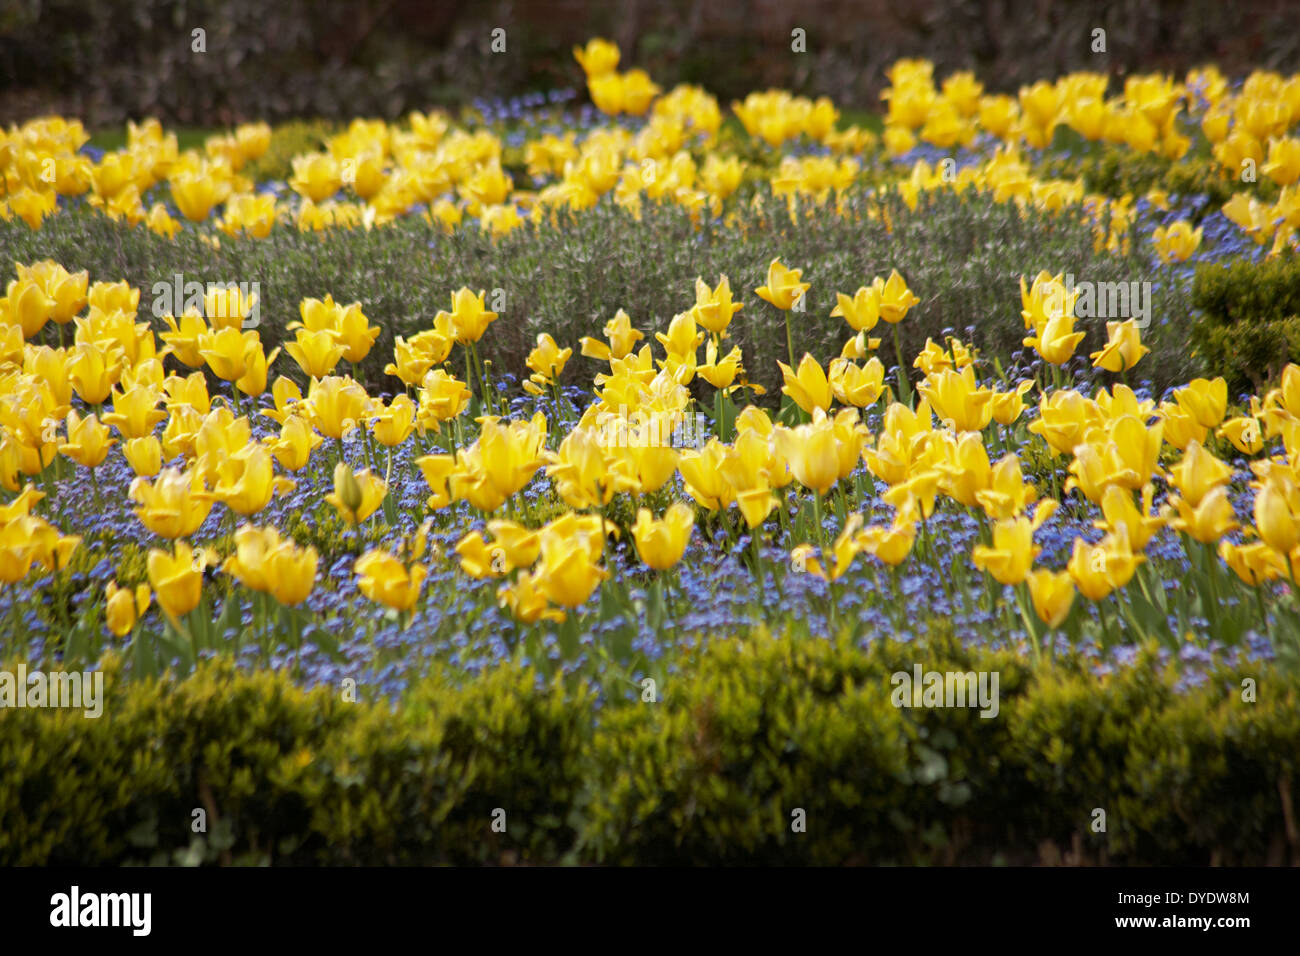 contrasting yellow tulips and blue forget me nots in flower beds in April Stock Photo